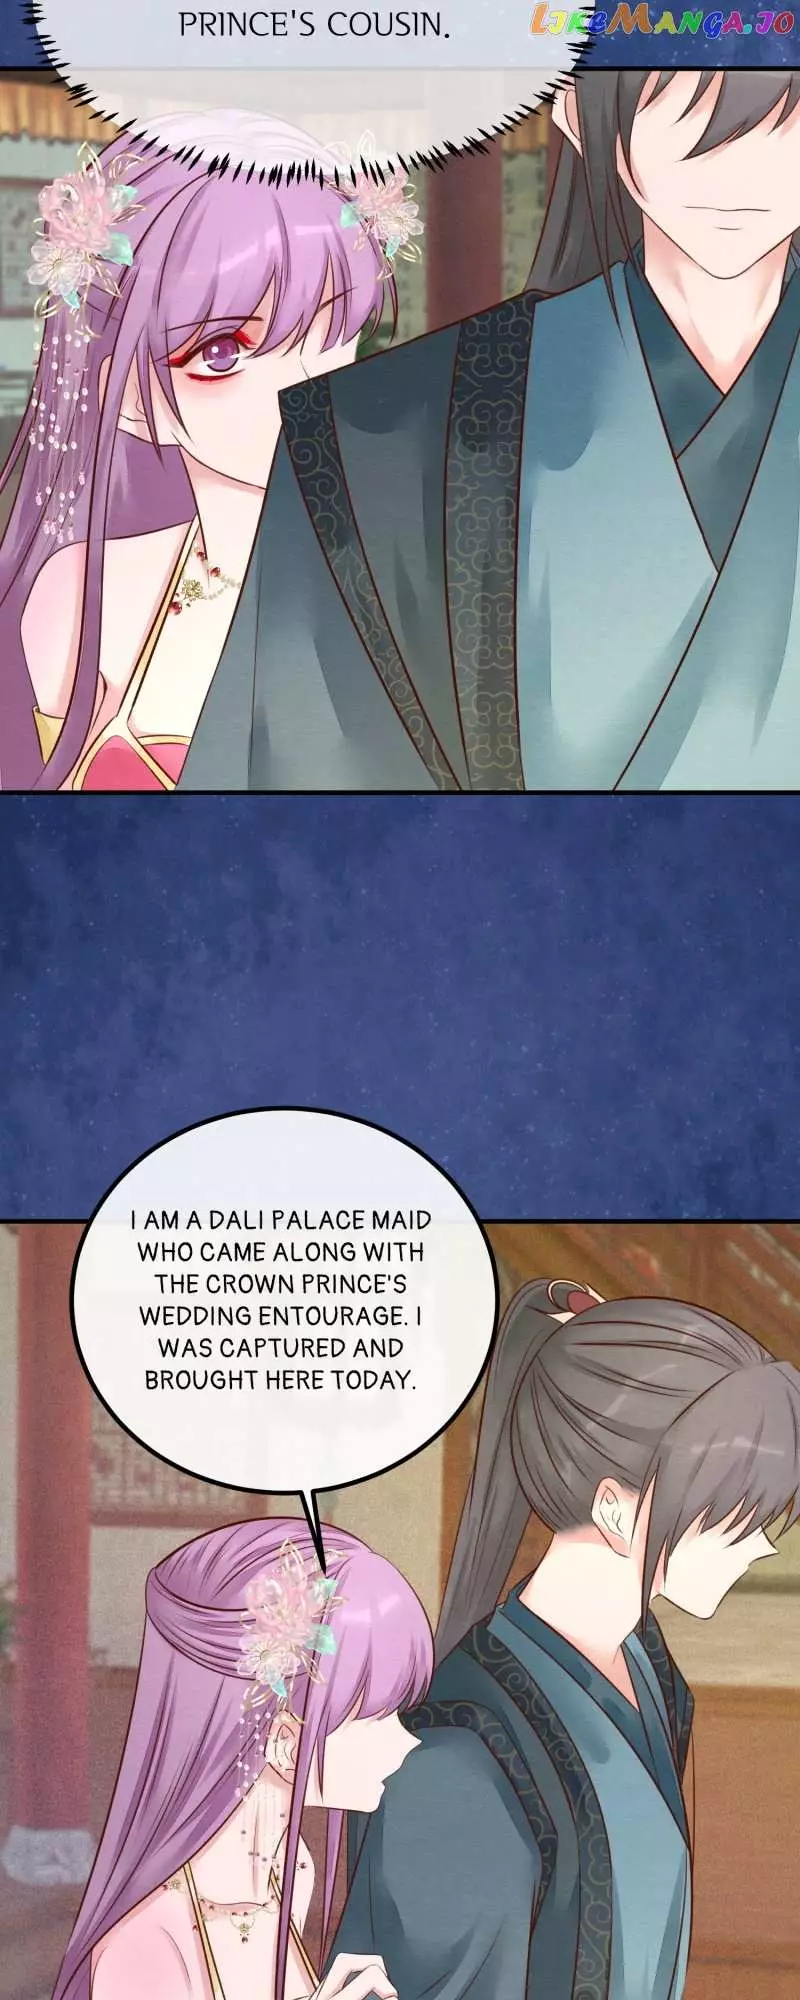 The Widowed Empress Needs Her Romance - 113 page 8-dad877fc